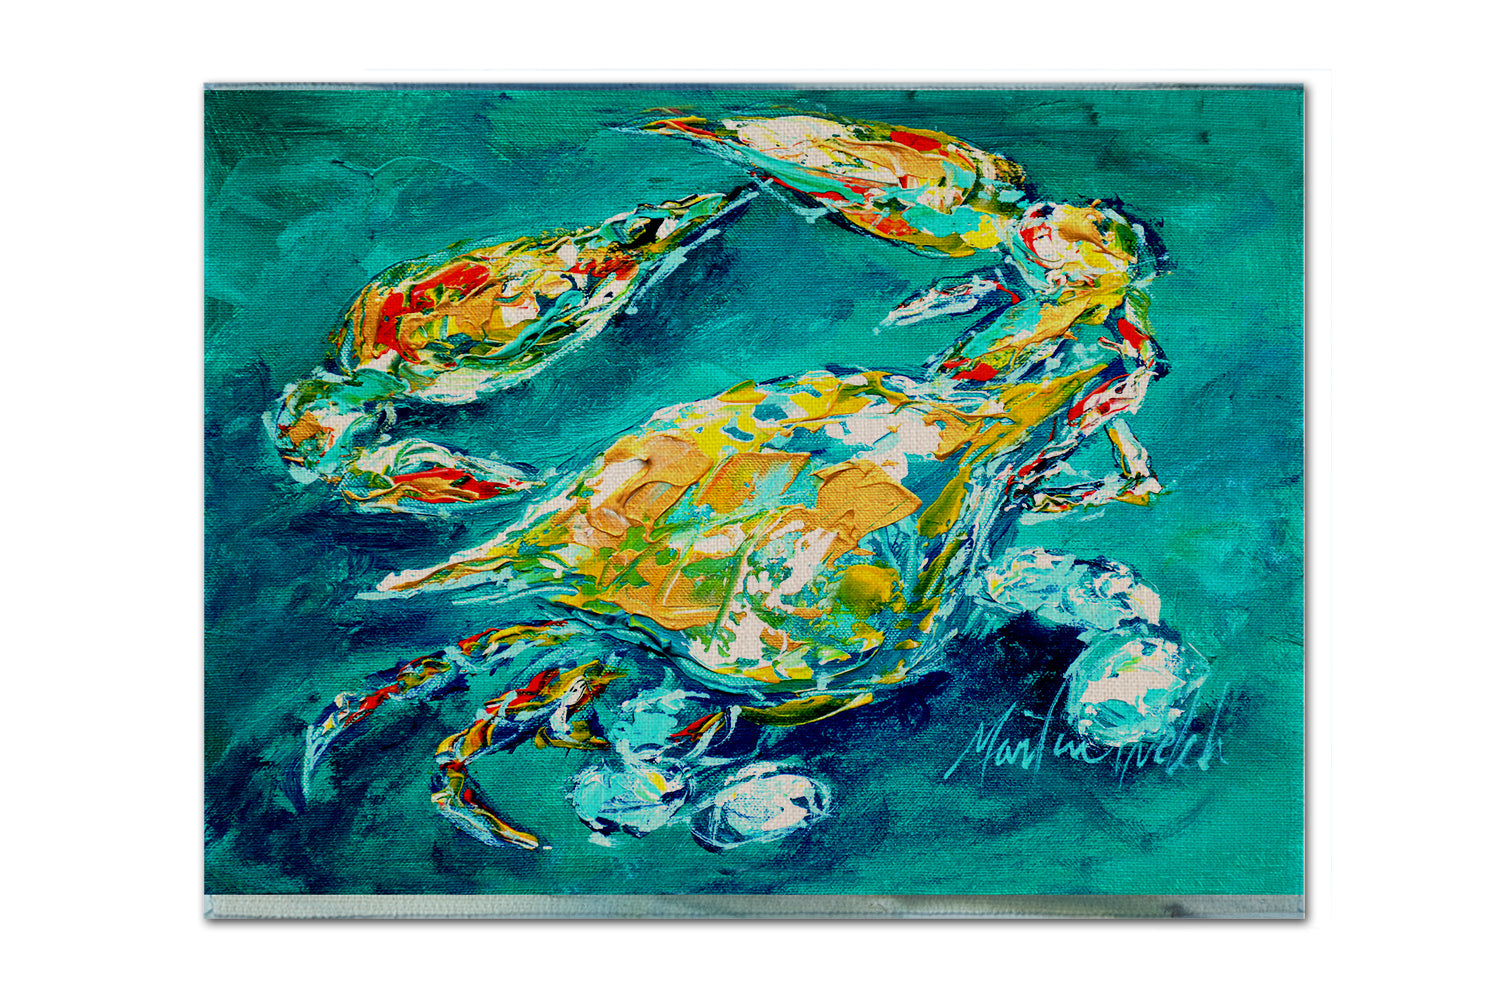 Buy this By Chance Crab in Aqua blue Fabric Placemat